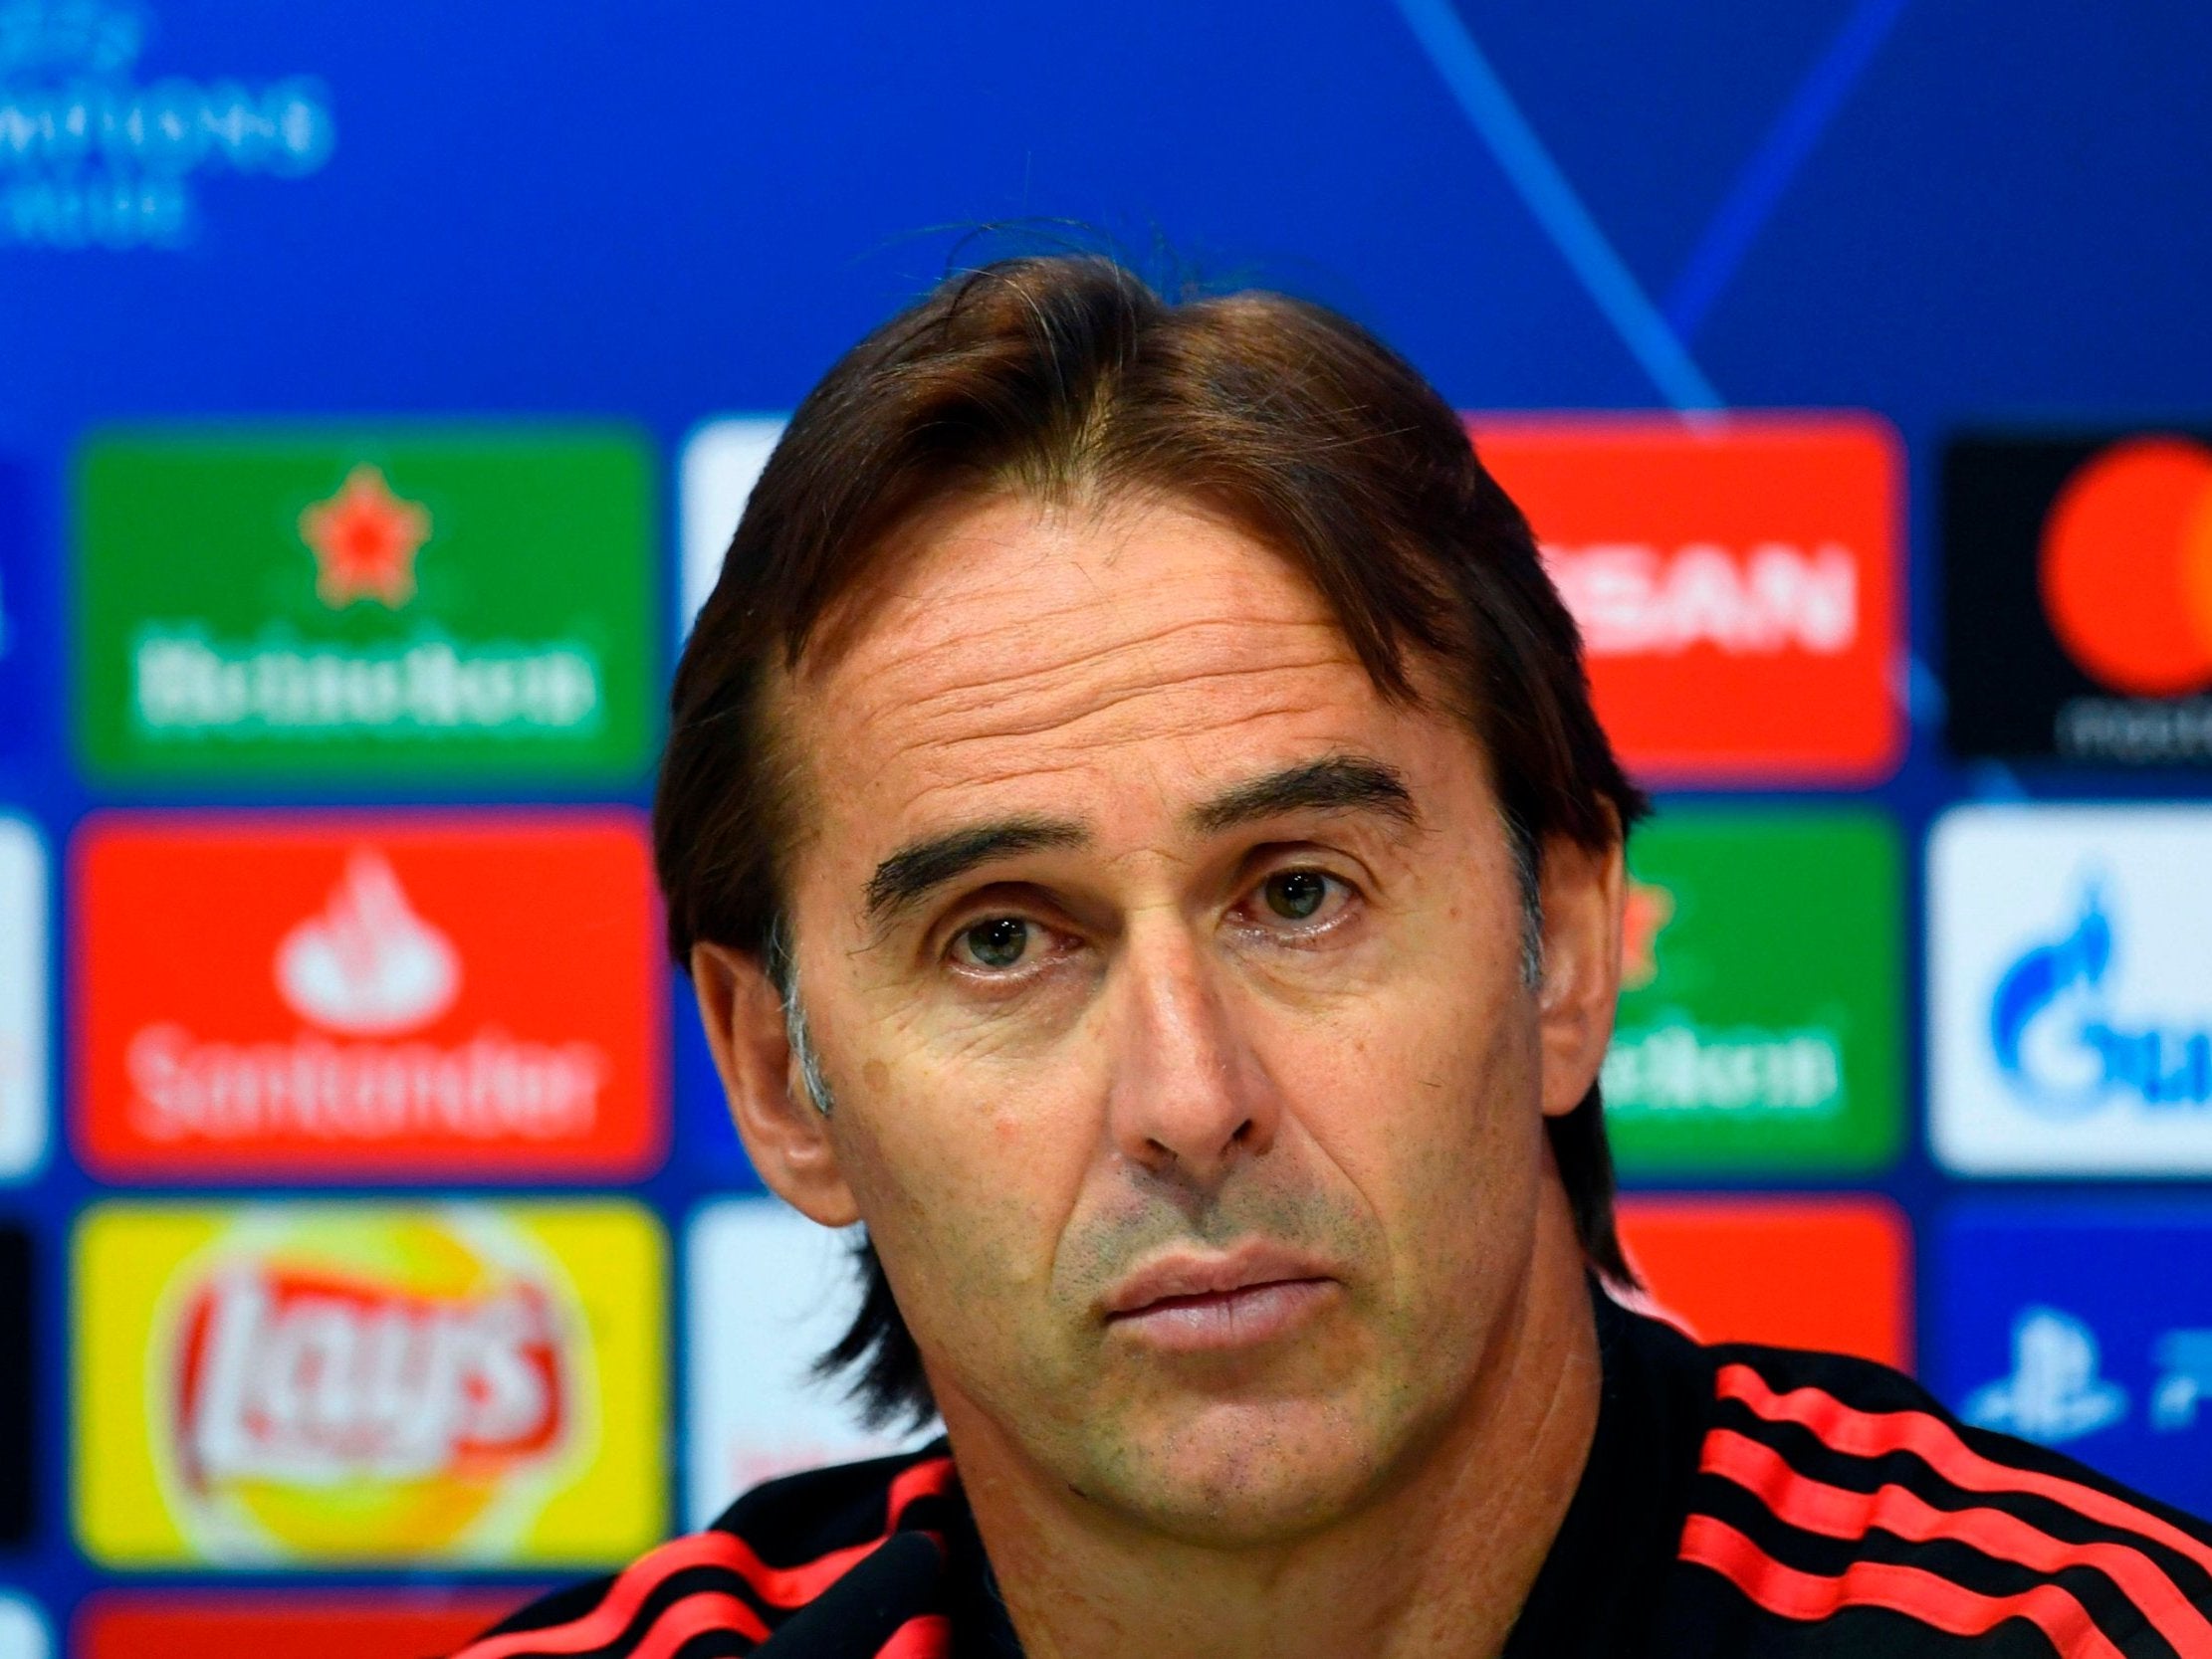 Julen Lopetegui will be in charge of Real Madrid against Barcelona this weekend